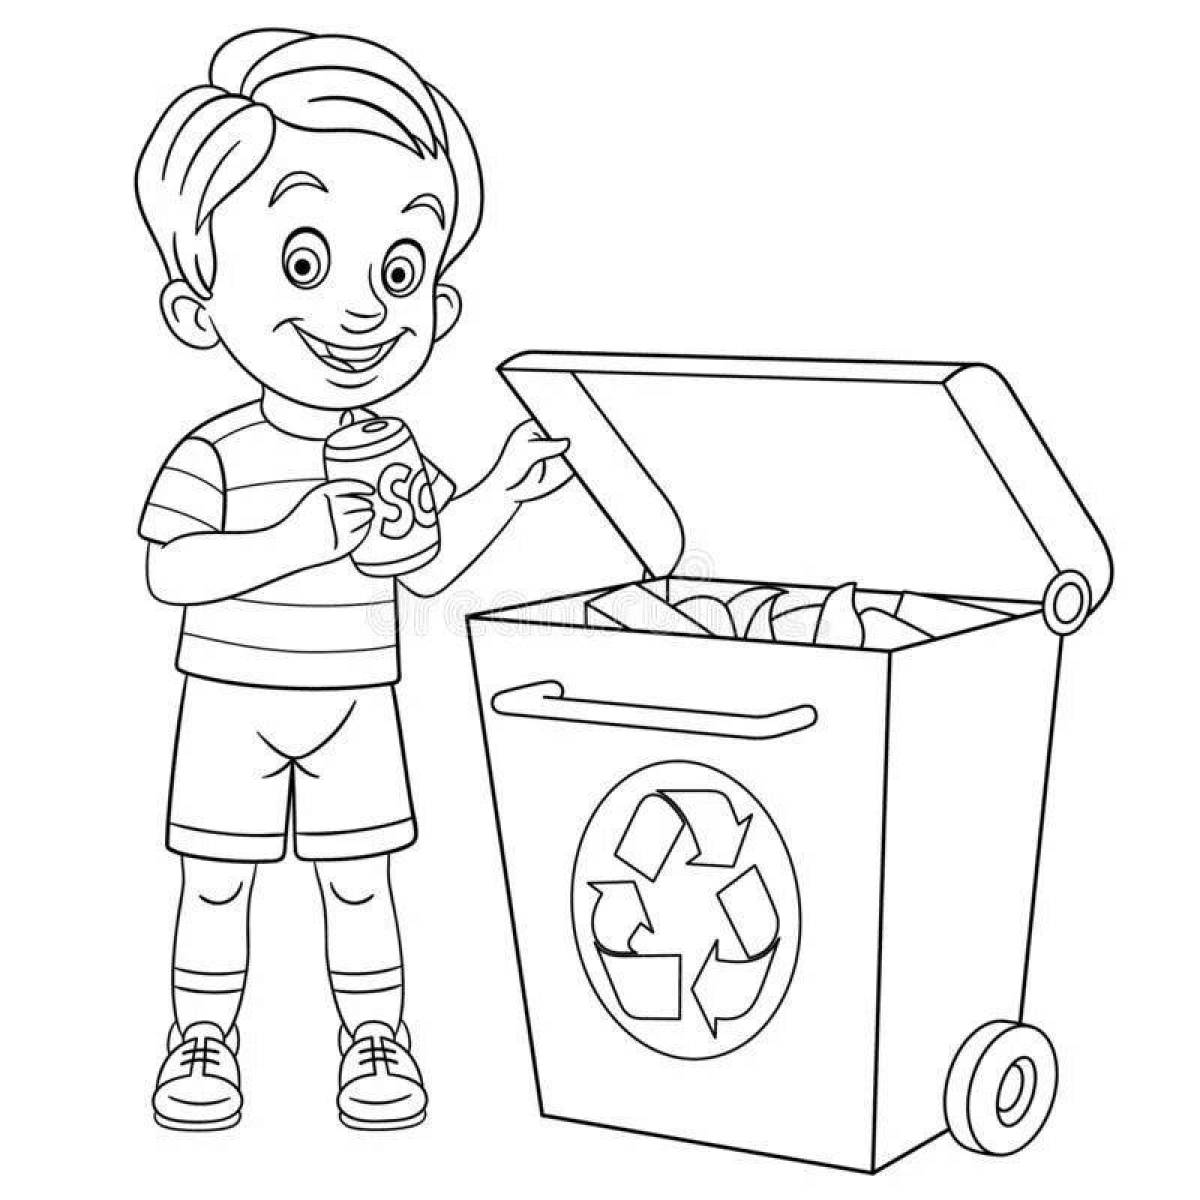 Fairy wastebasket coloring page